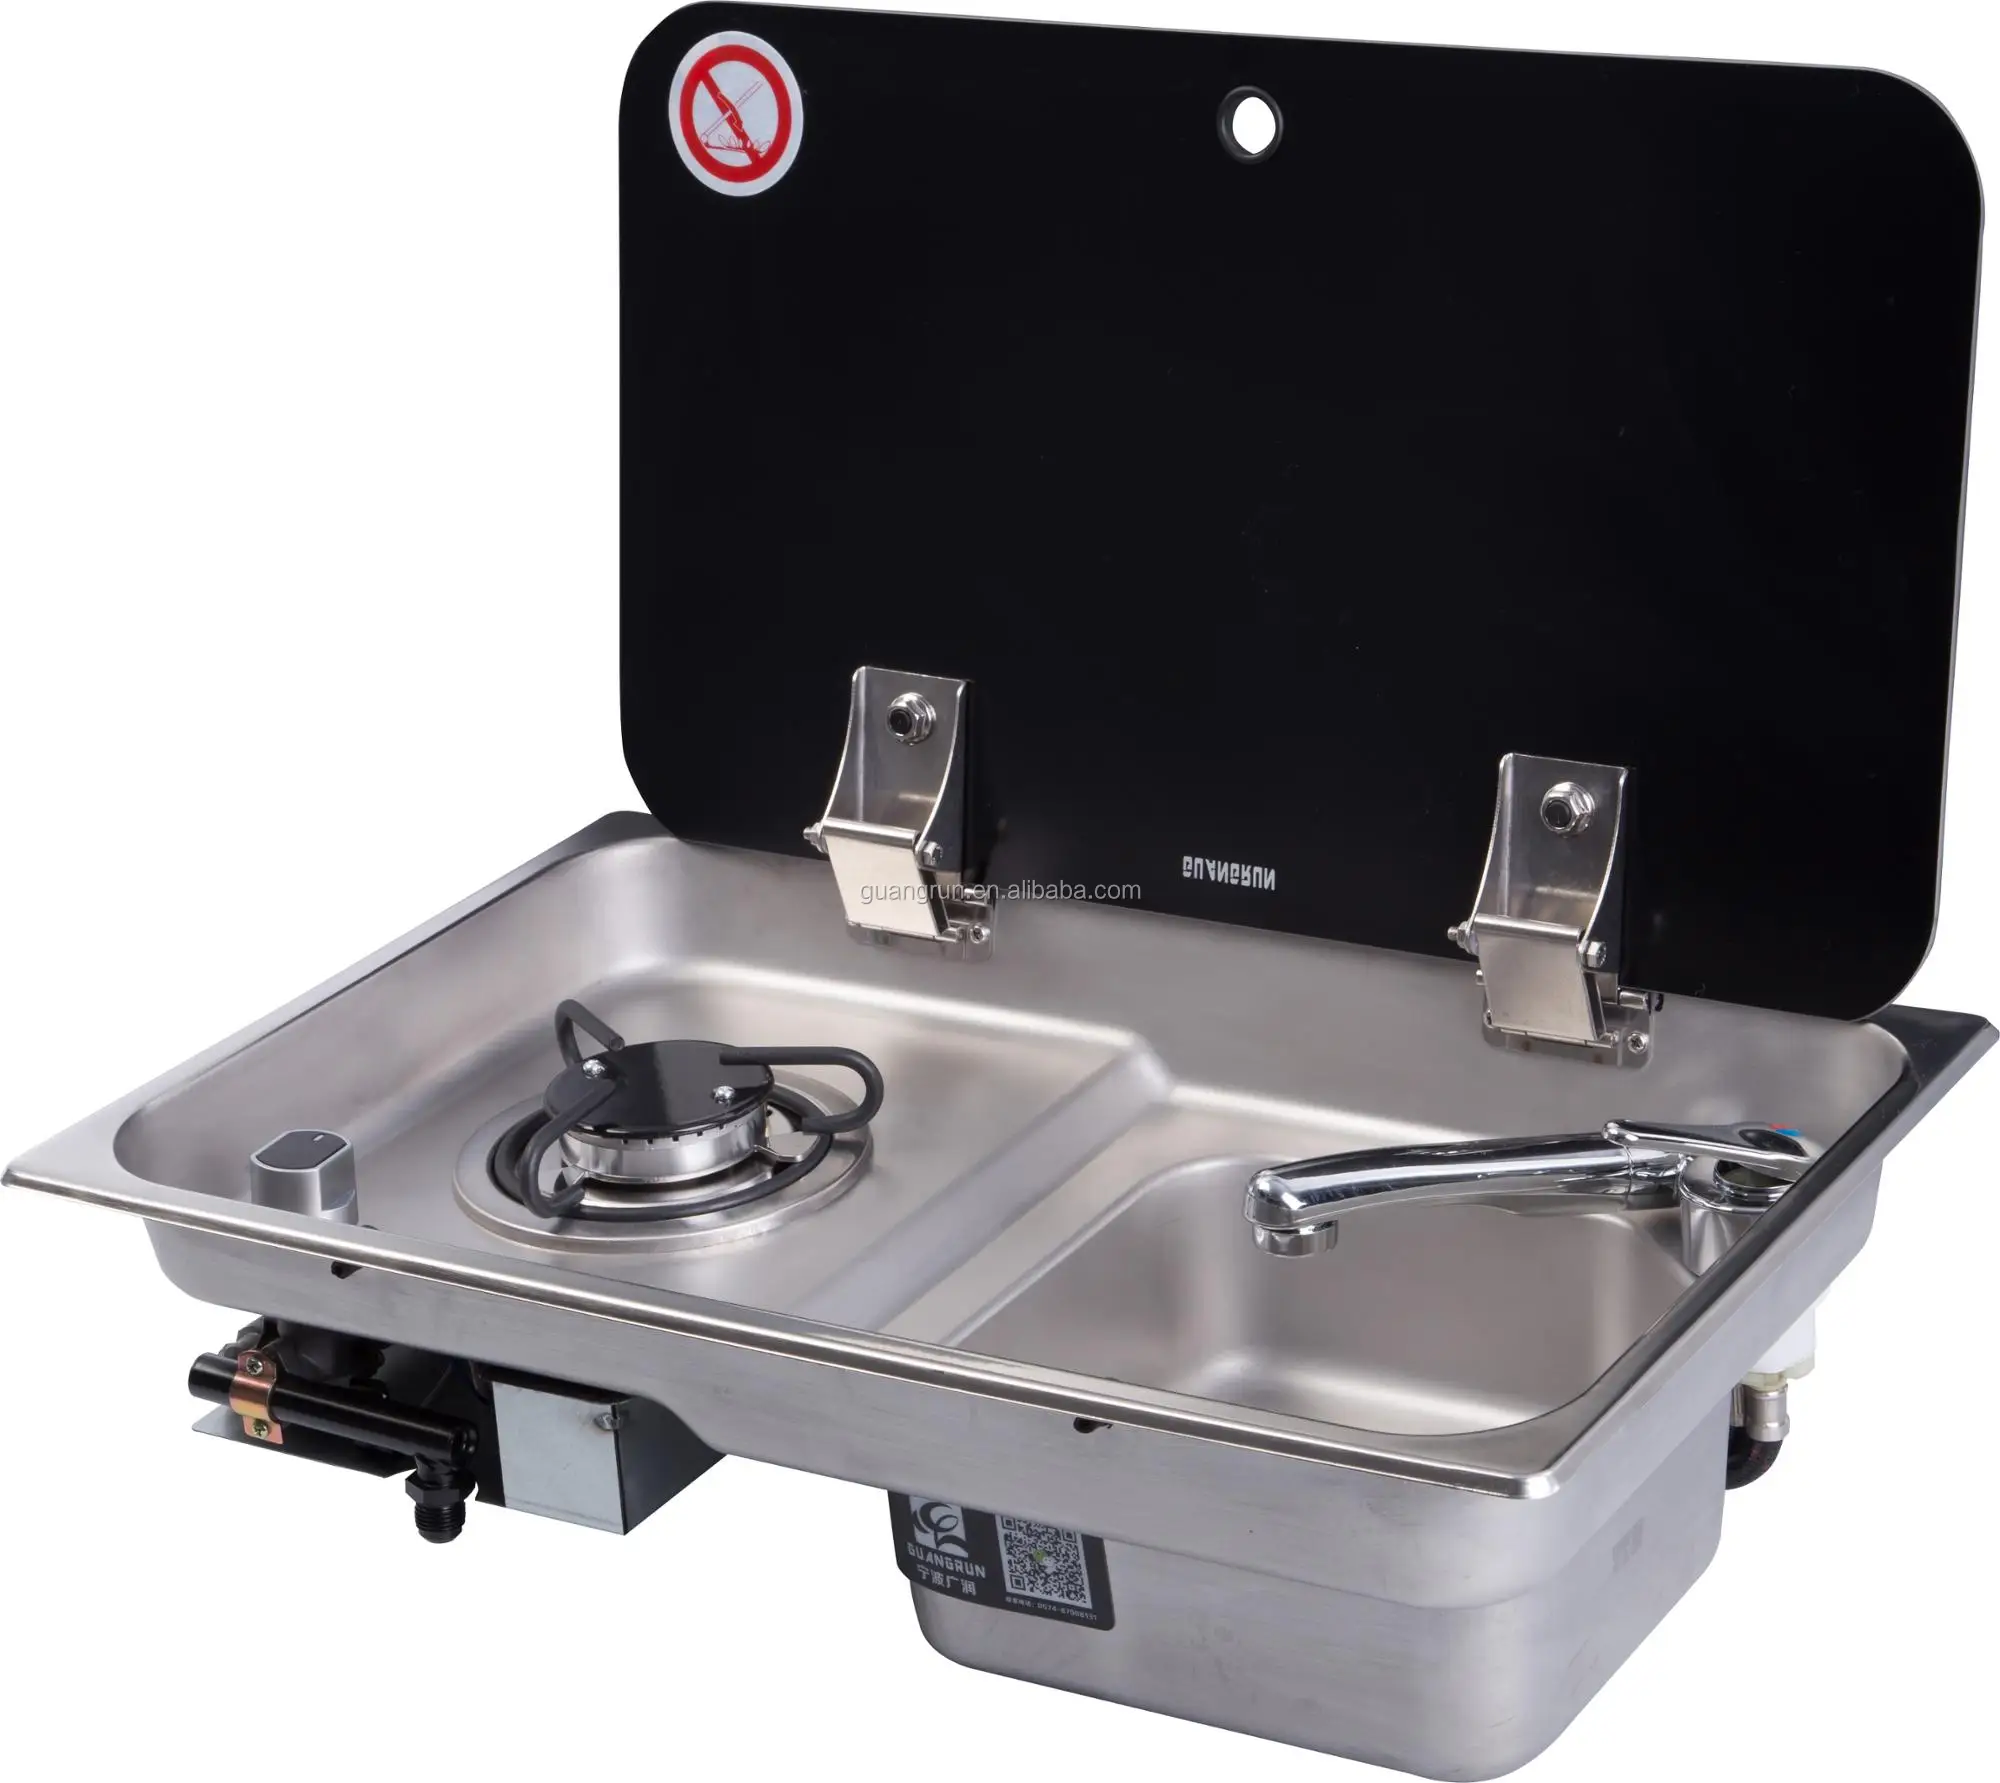 

Caravan Kitchen RV Stainless Steel Mini One Burner Electric pulse ignition Gas Stove with one bowl sink